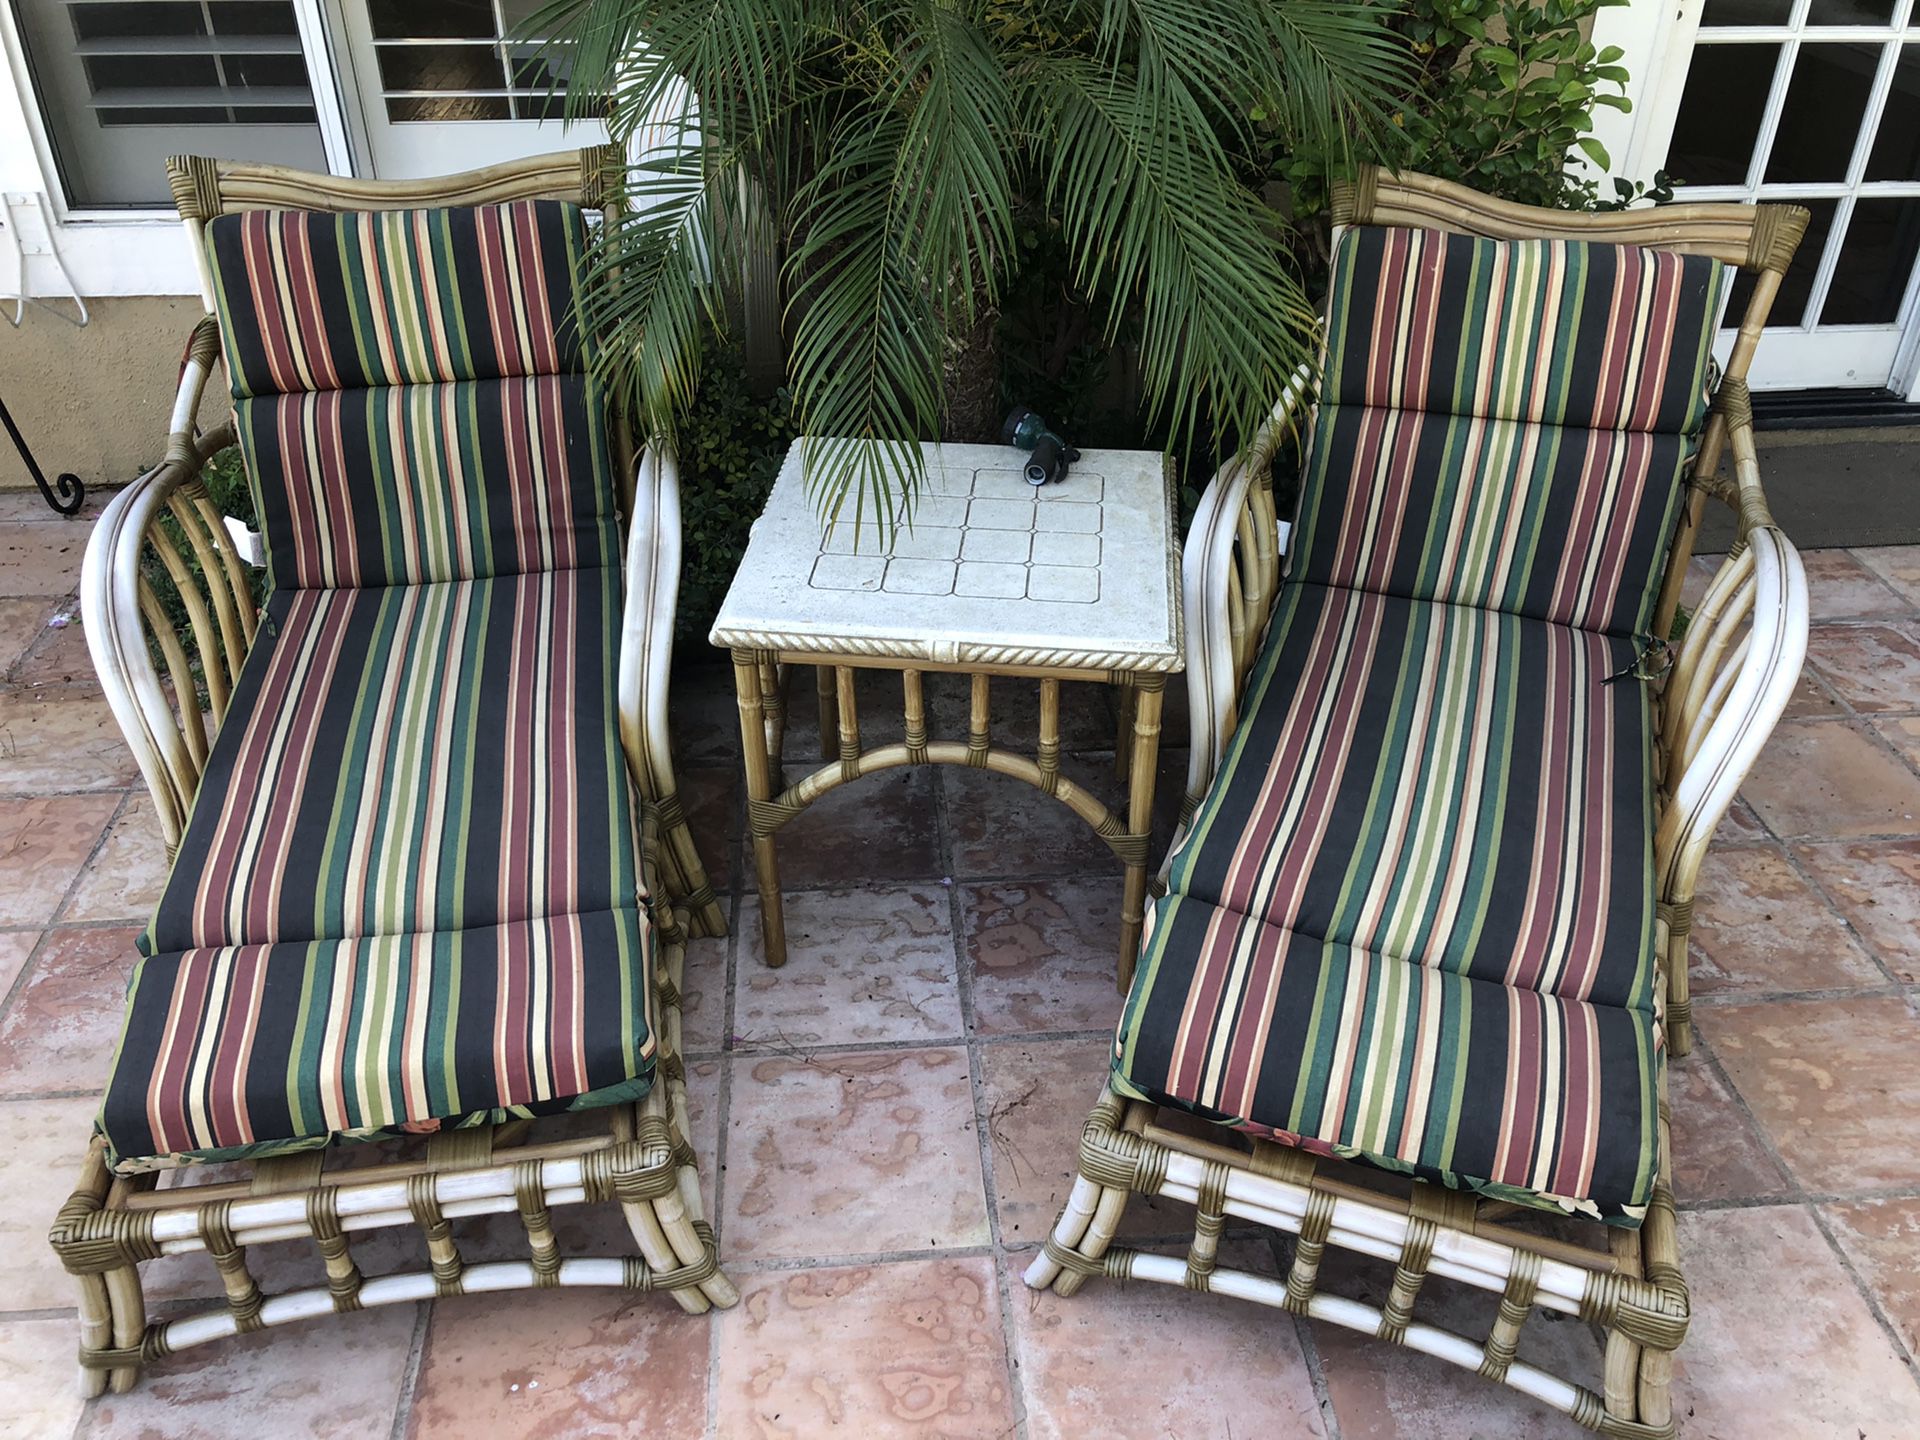 Outdoor patio lounge chairs and table